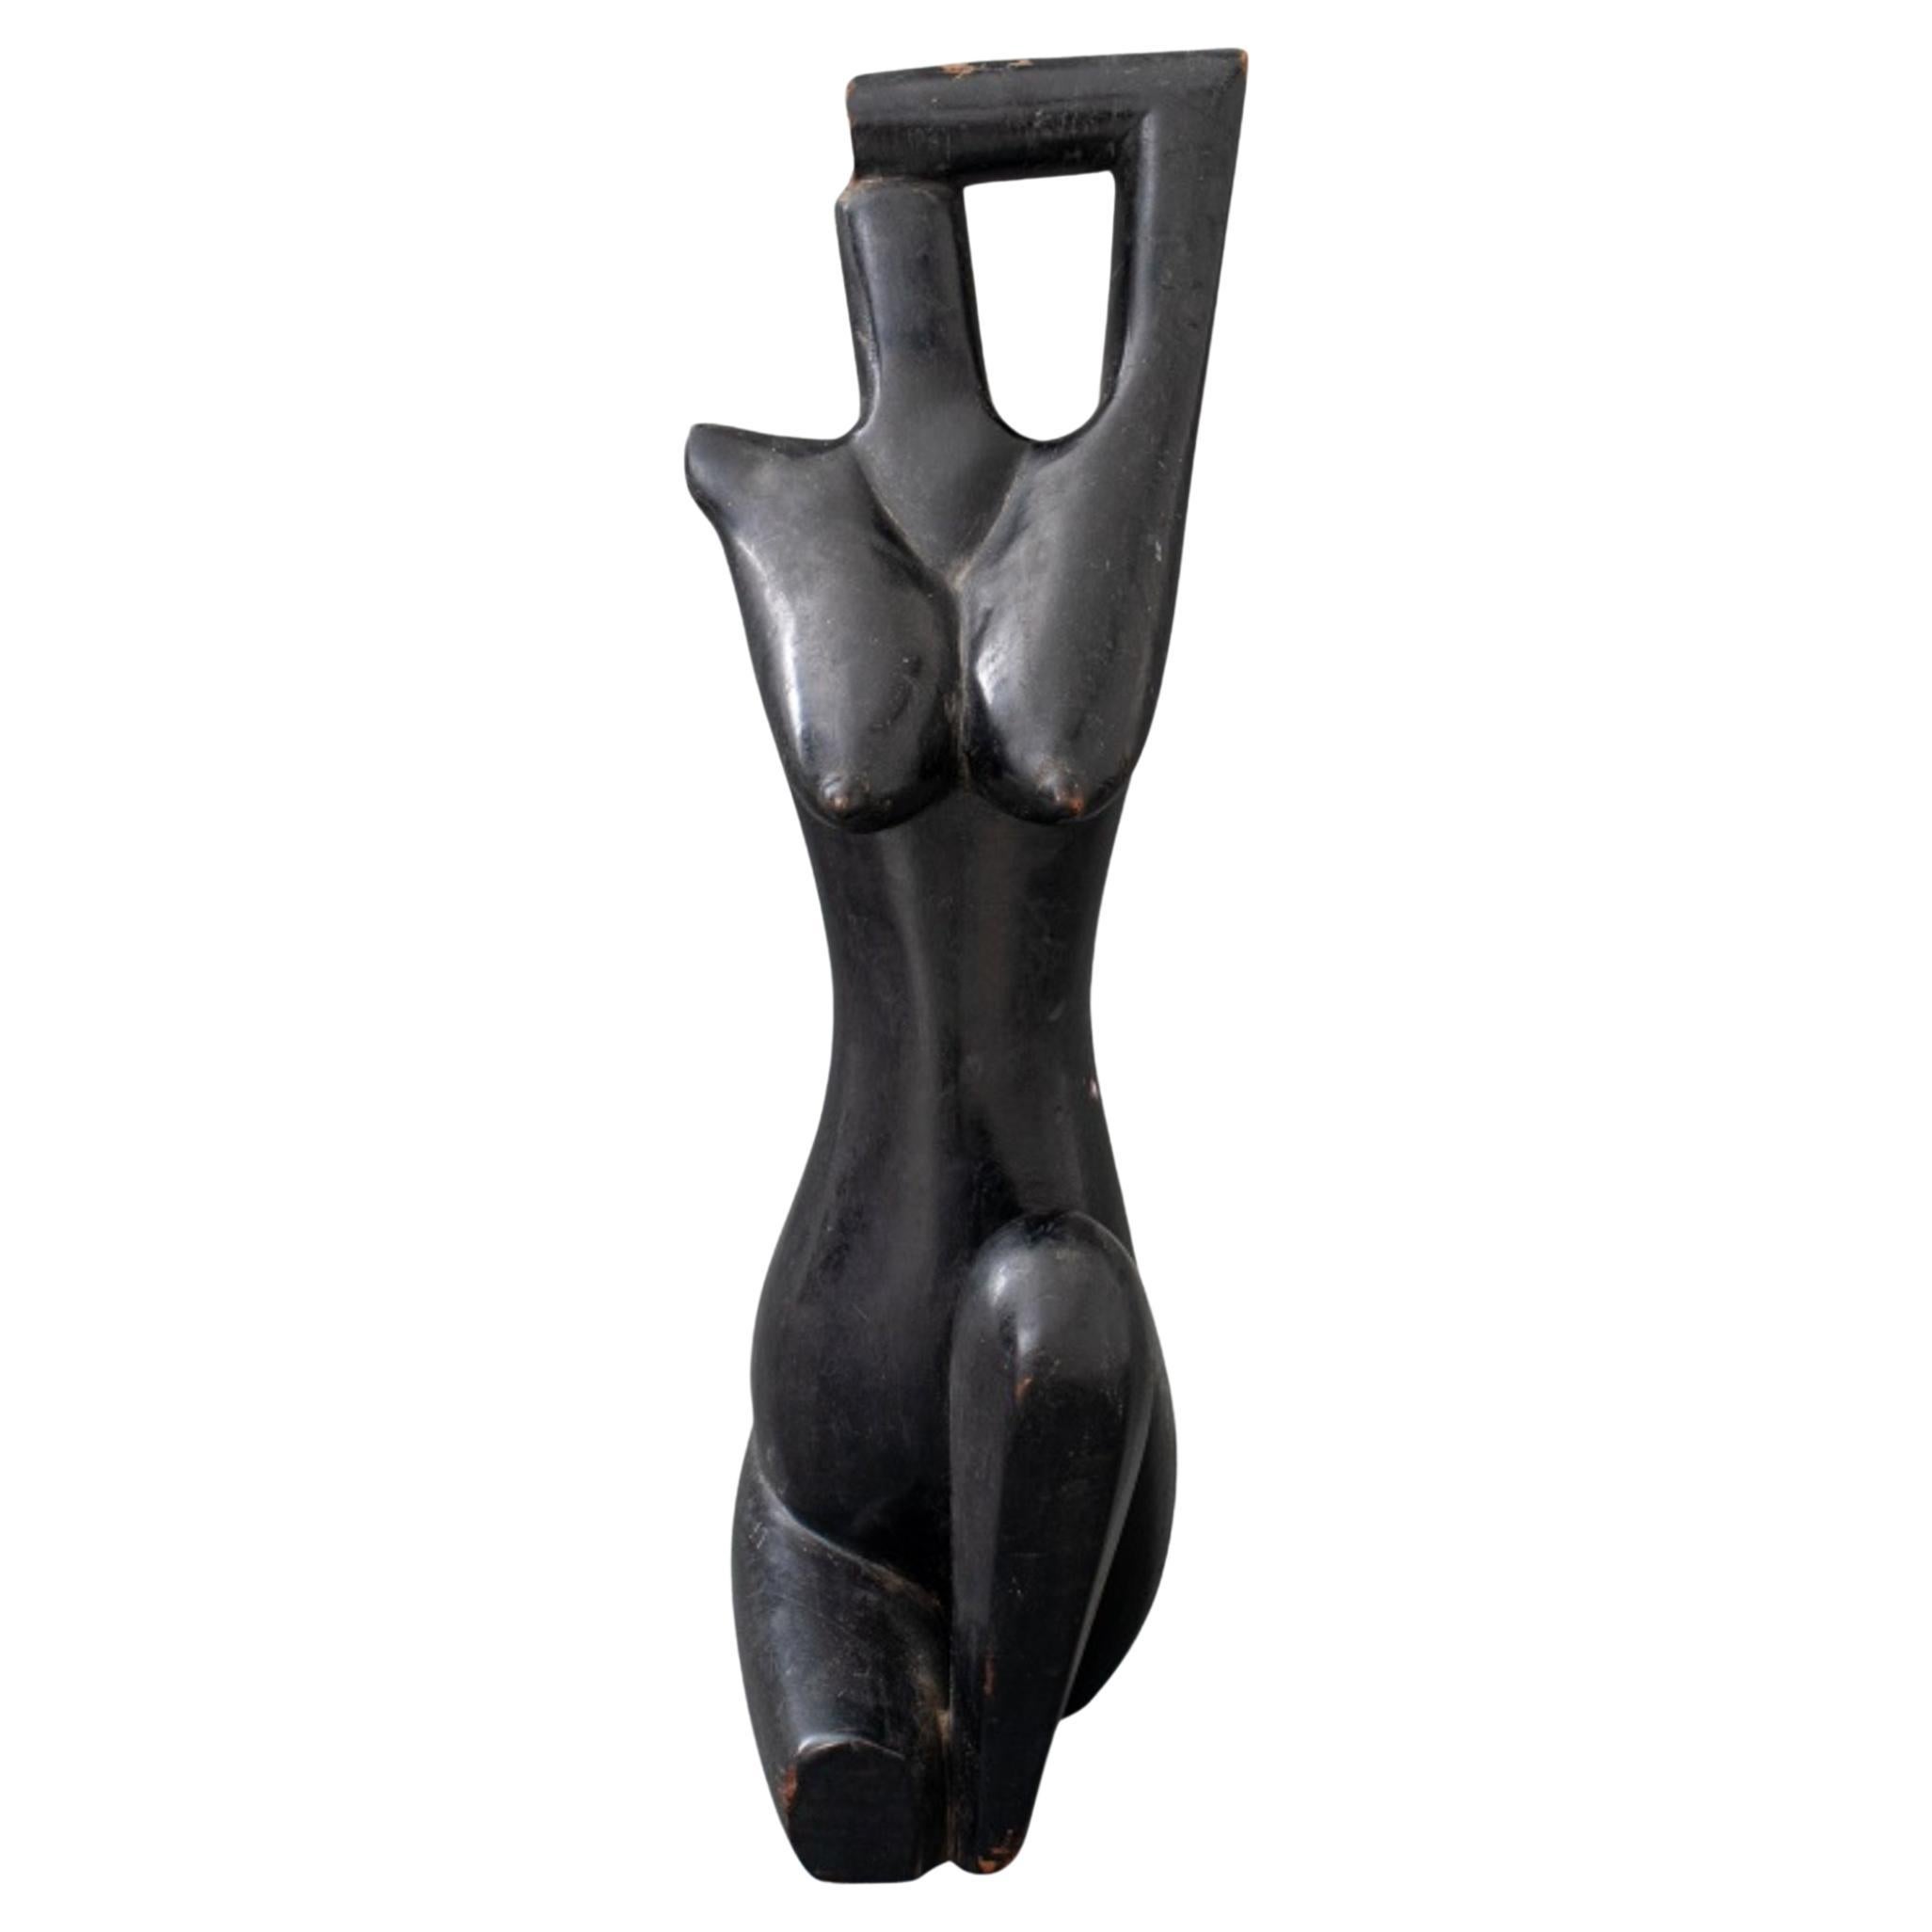 Female Nude Sculpture in the African Taste, 20th Century